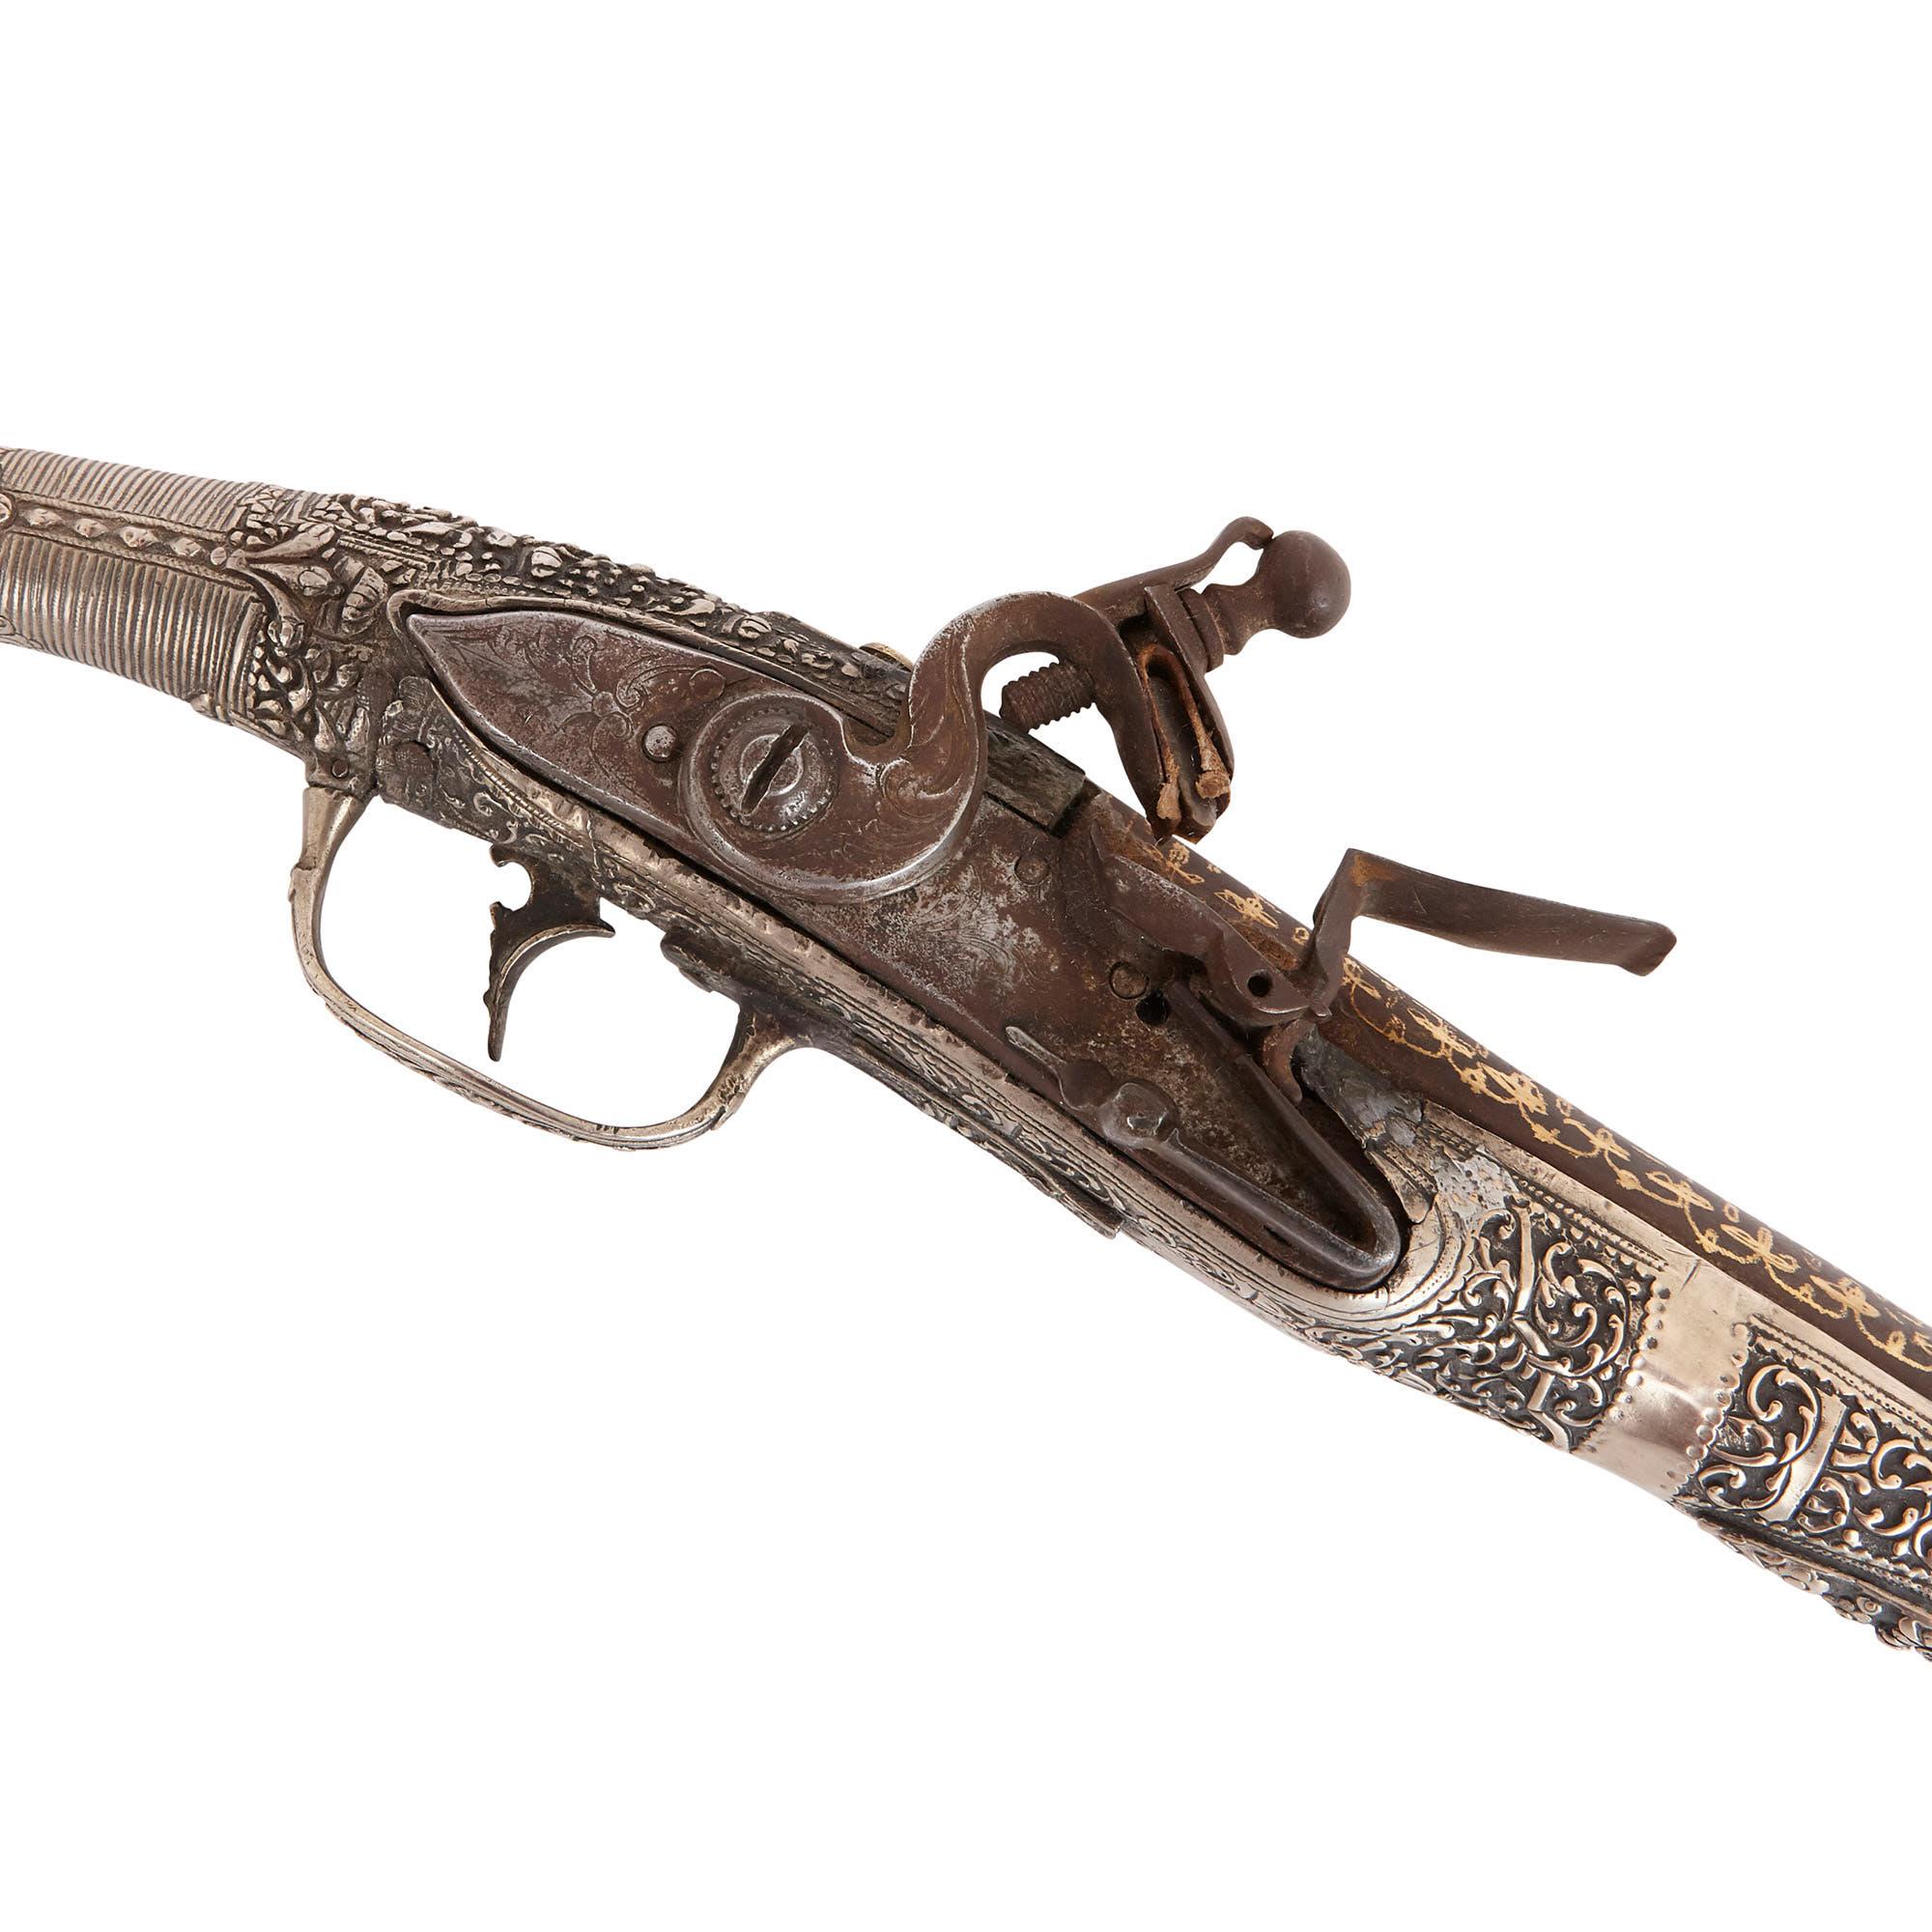 These pistols have been beautifully decorated with finely chased and engraved silver, and gold-damascened work. They were crafted in South-Eastern Europe in the 19th century. The pistols are collectable, decorative pieces, which will look beautiful